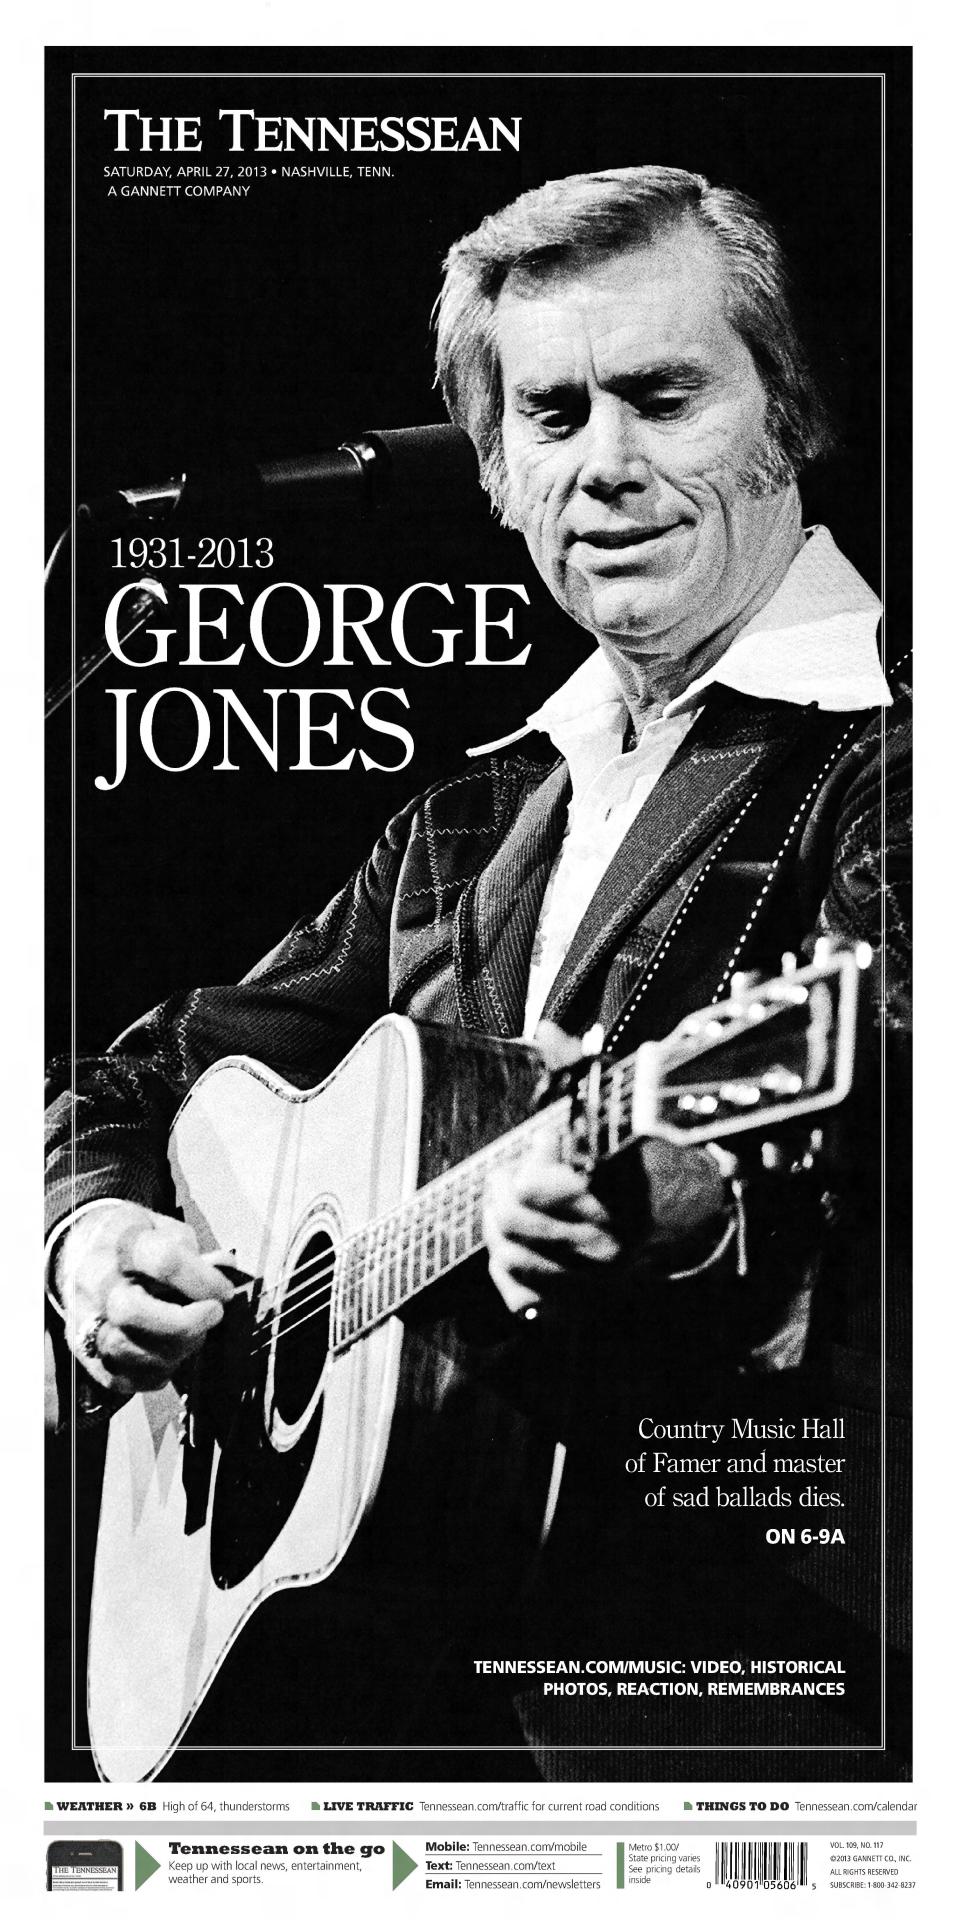 The front page of the April 27, 2013, of The (Nashville) Tennessean for the coverage of the death of George Jones.